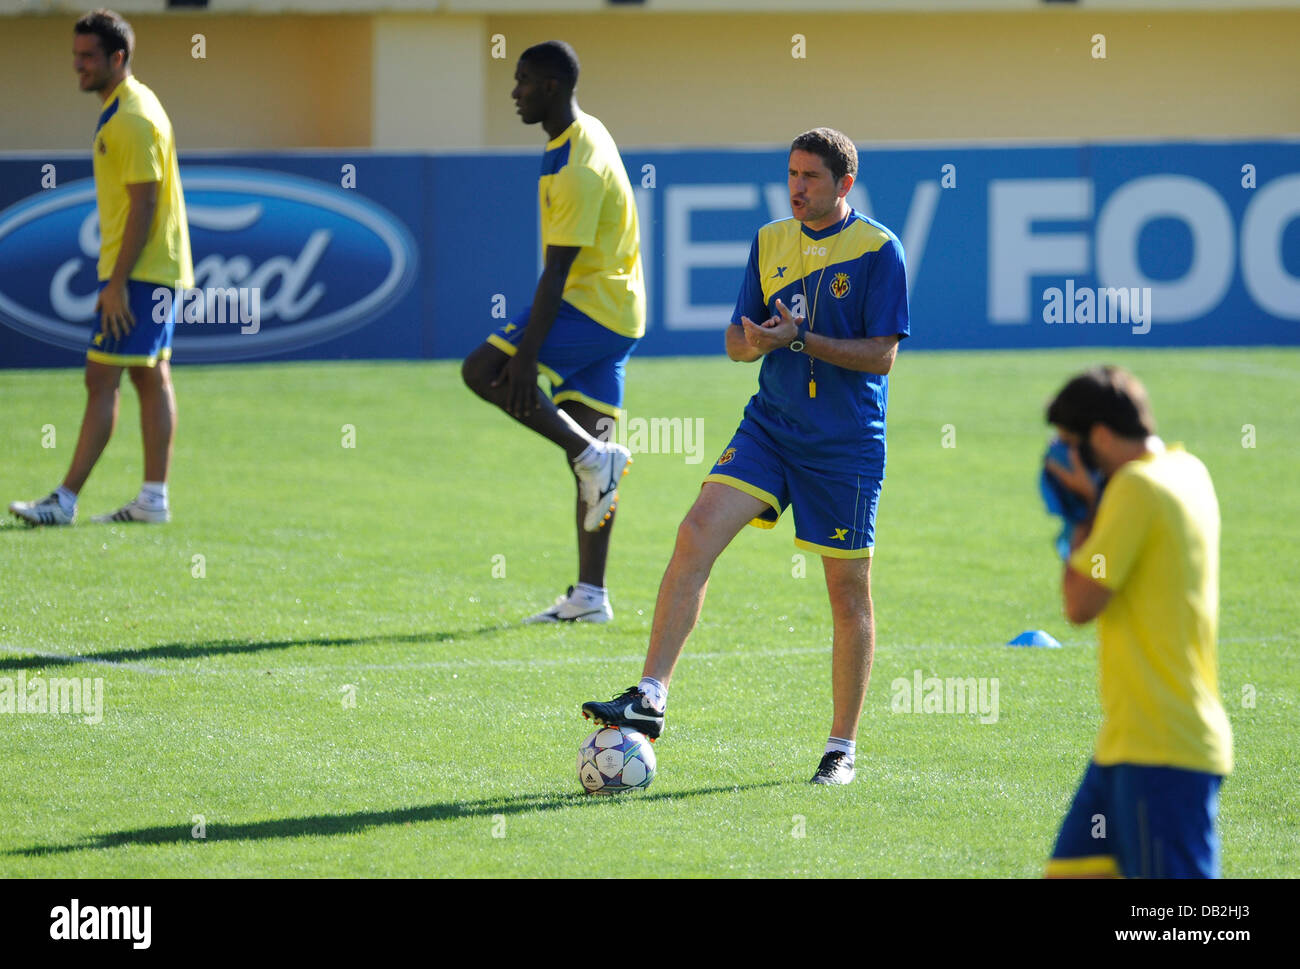 Coach of the Spanish soccer team Villarreal CF Juan Carlos Garrido (2-R) claps his hands during a training session of his team at the El Madrigal stadium in Villarreal, Germany, 13 September 2011. Villarreal faces Bayern Munich for the first Champions League group match on 14 September 2011. Photo: Andreas Gebert Stock Photo